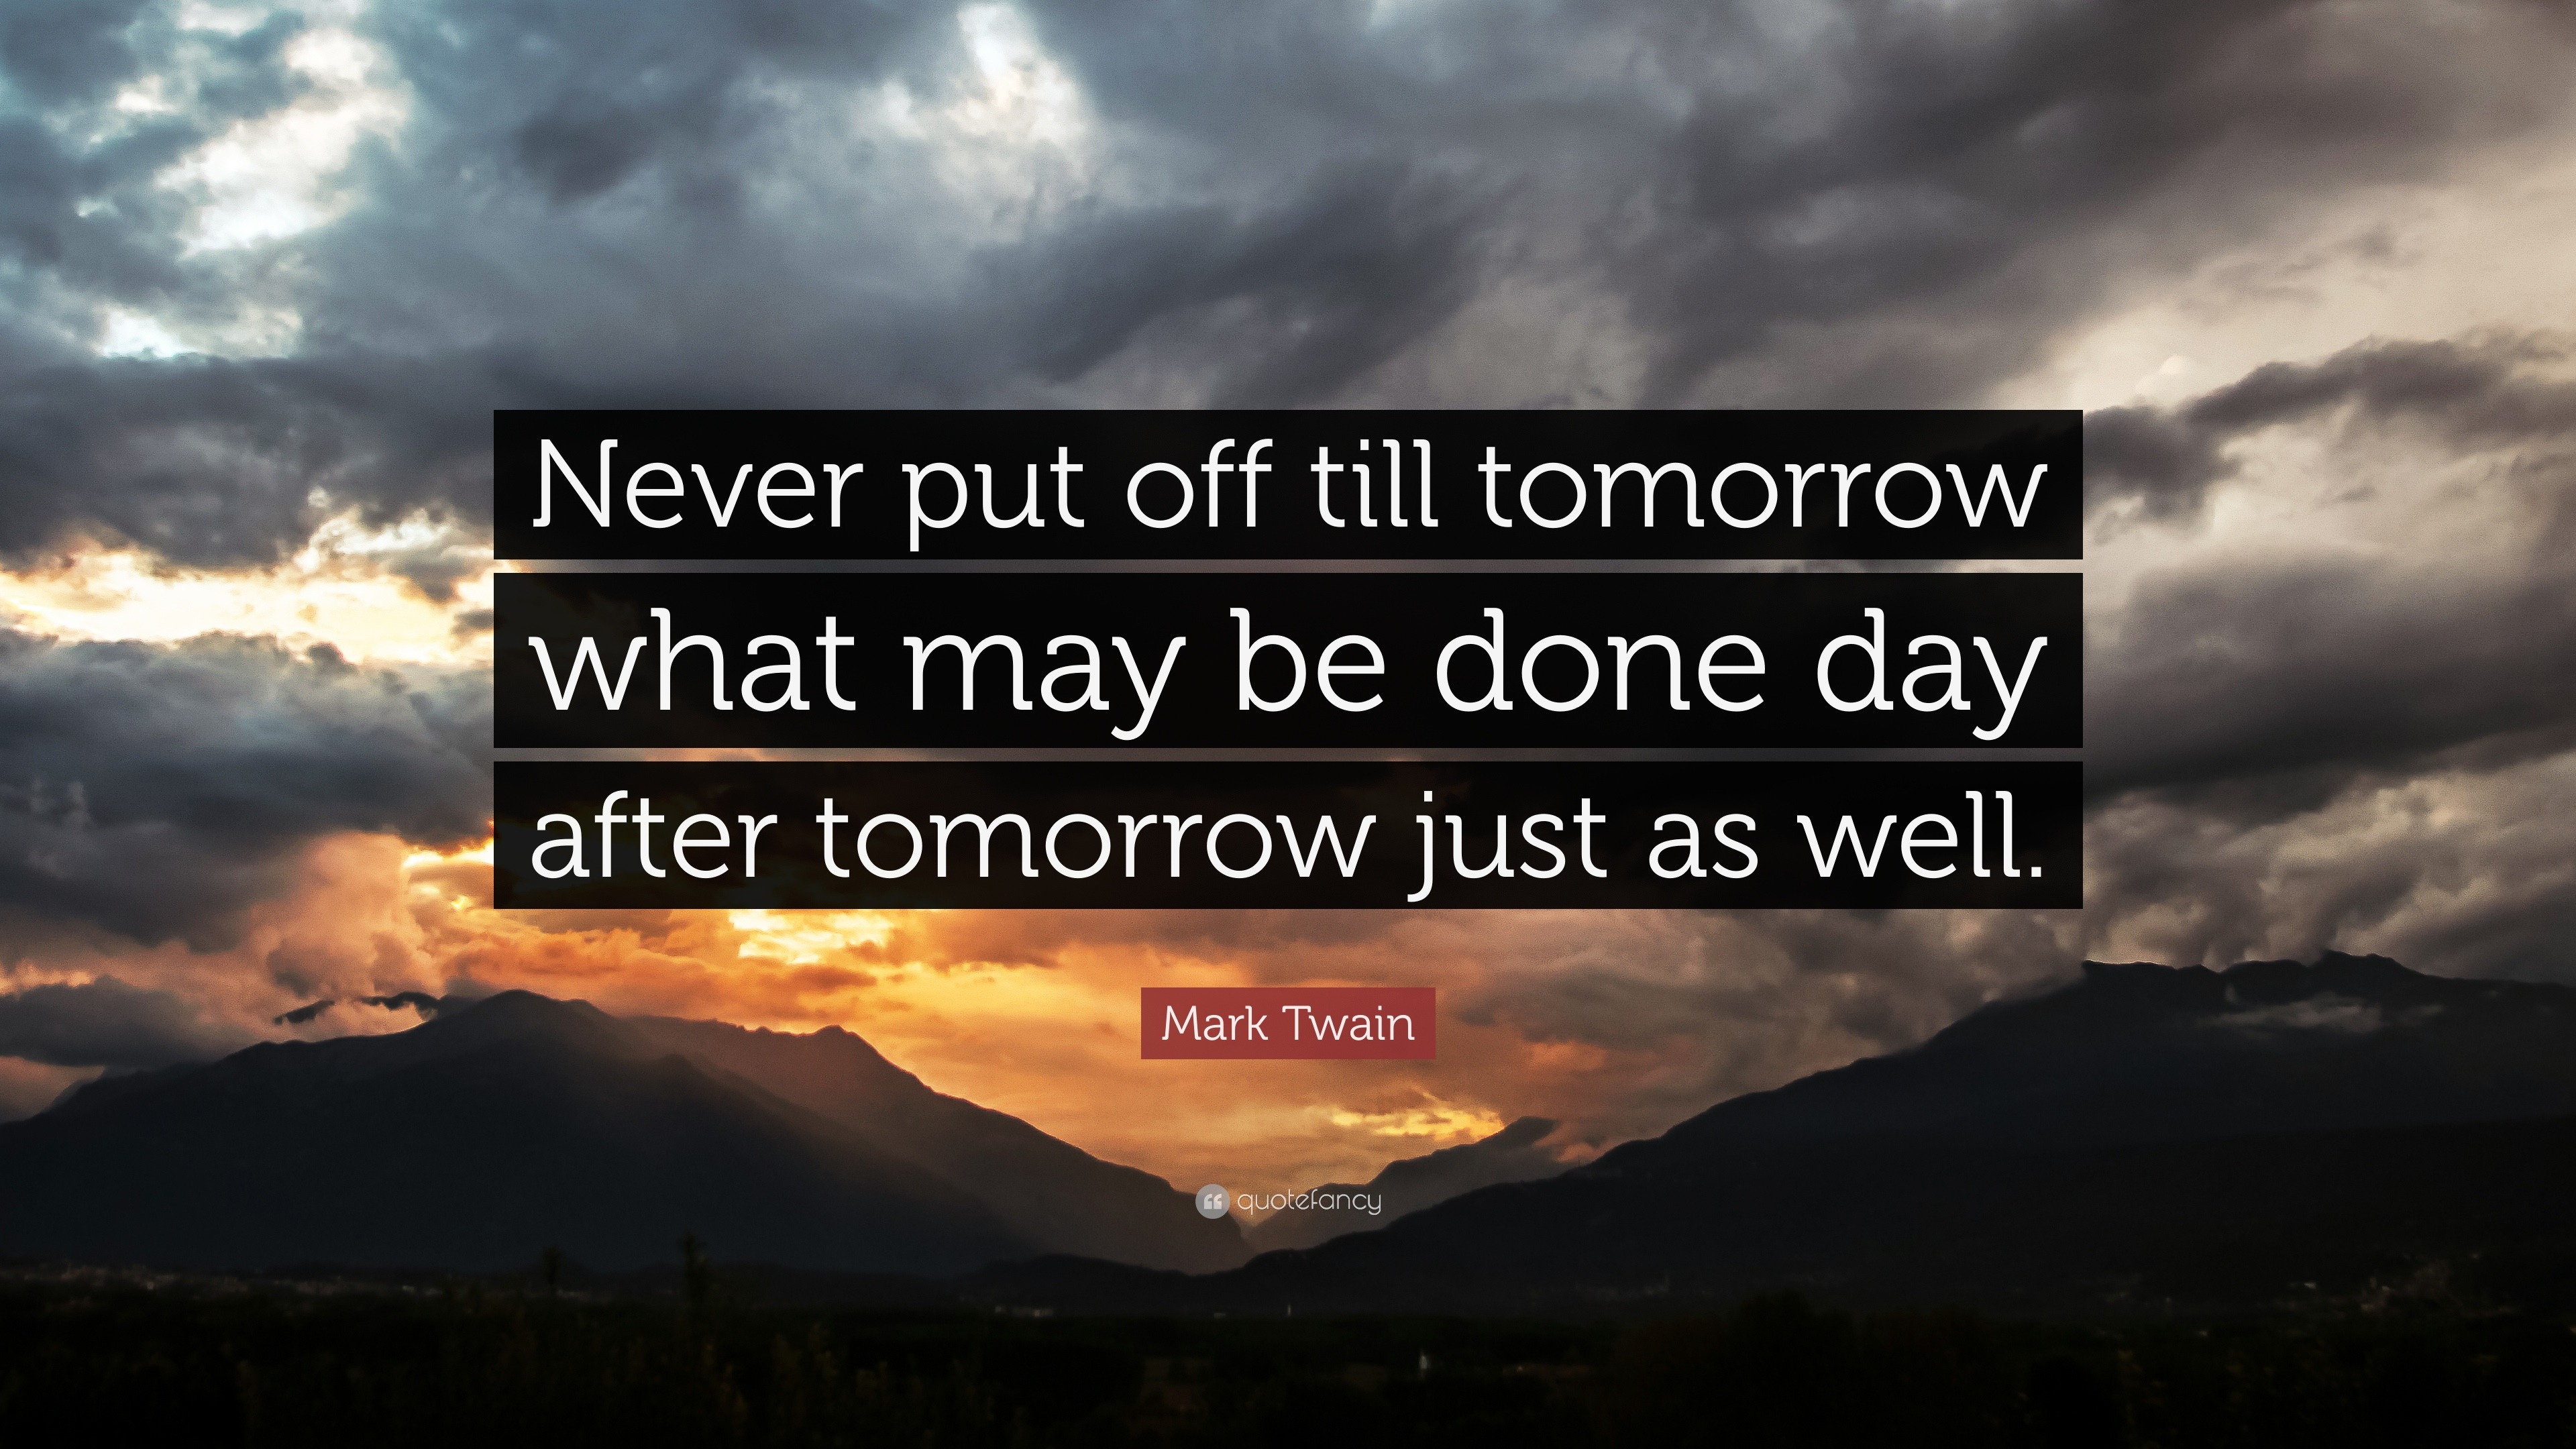 Mark Twain Quote: Never put off till tomorrow what may be done day